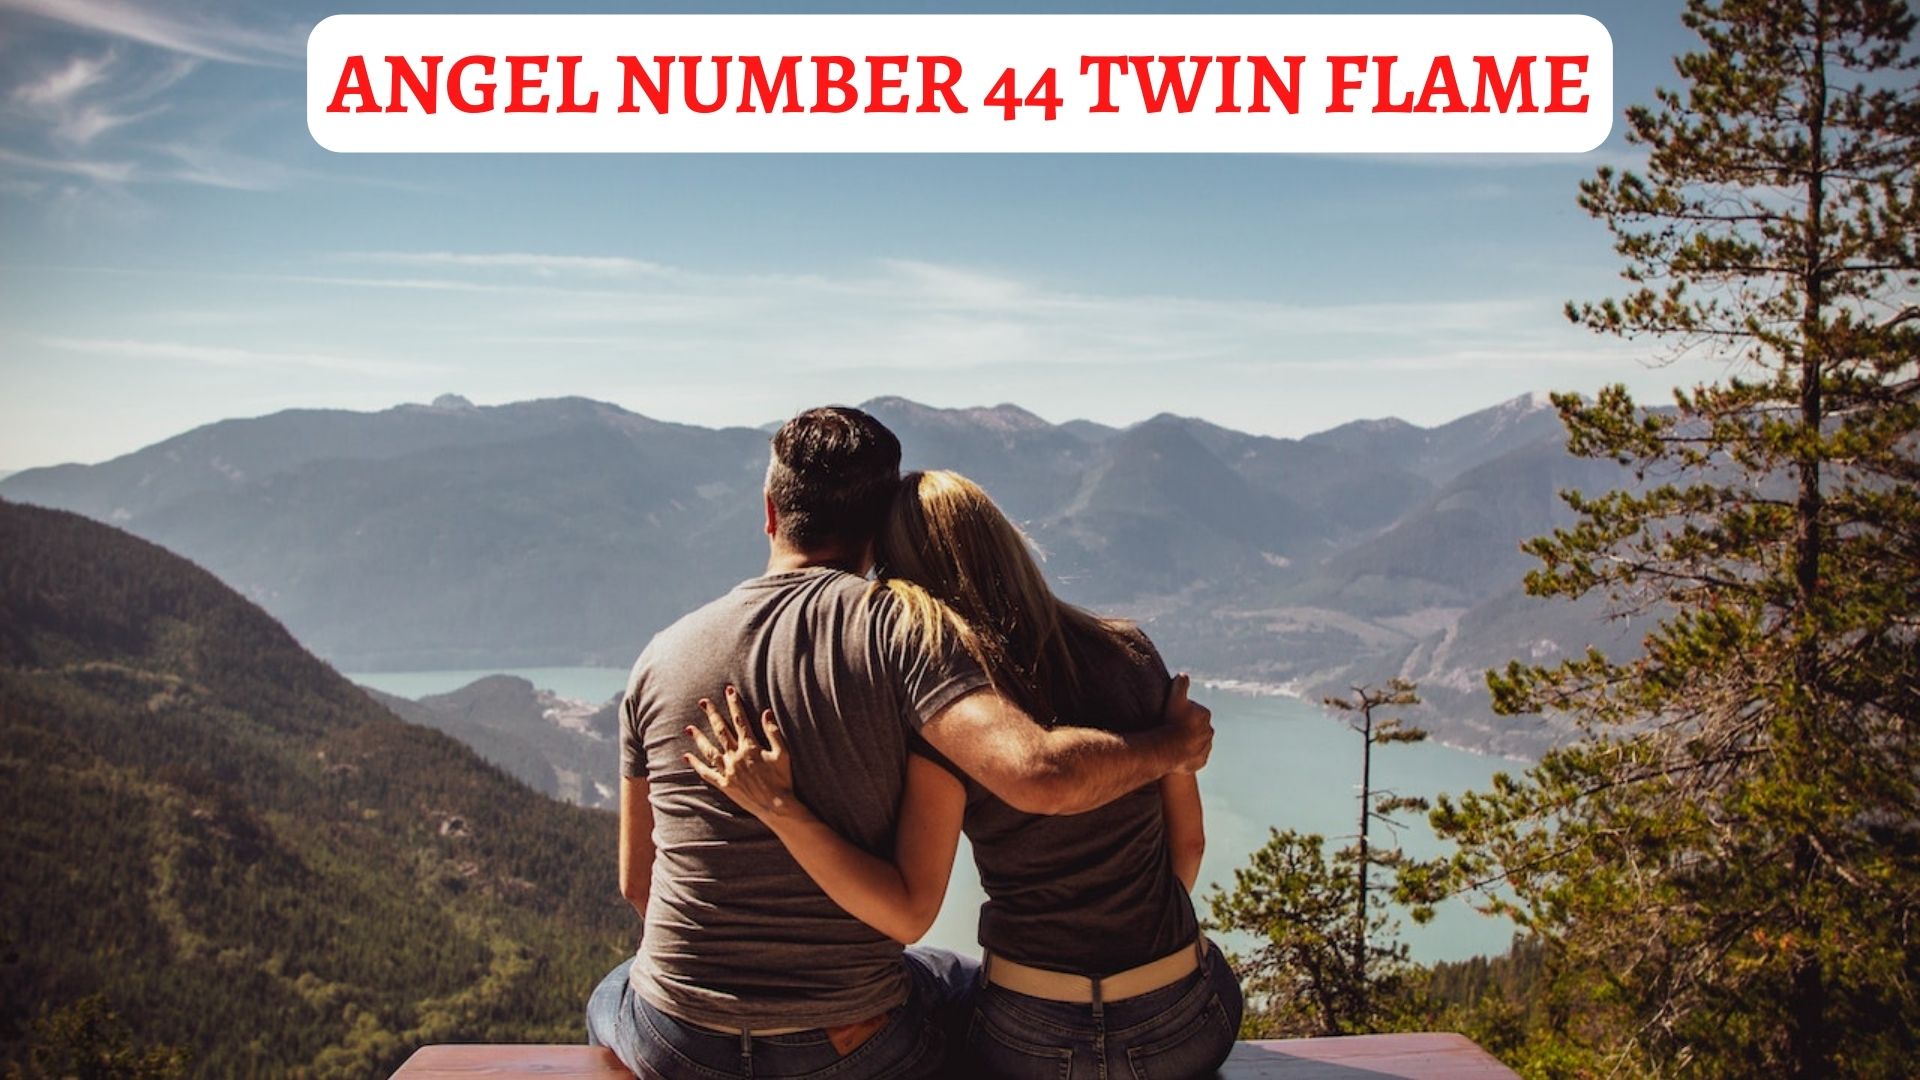 Angel Number 44 Twin Flame - Harmony And Stability